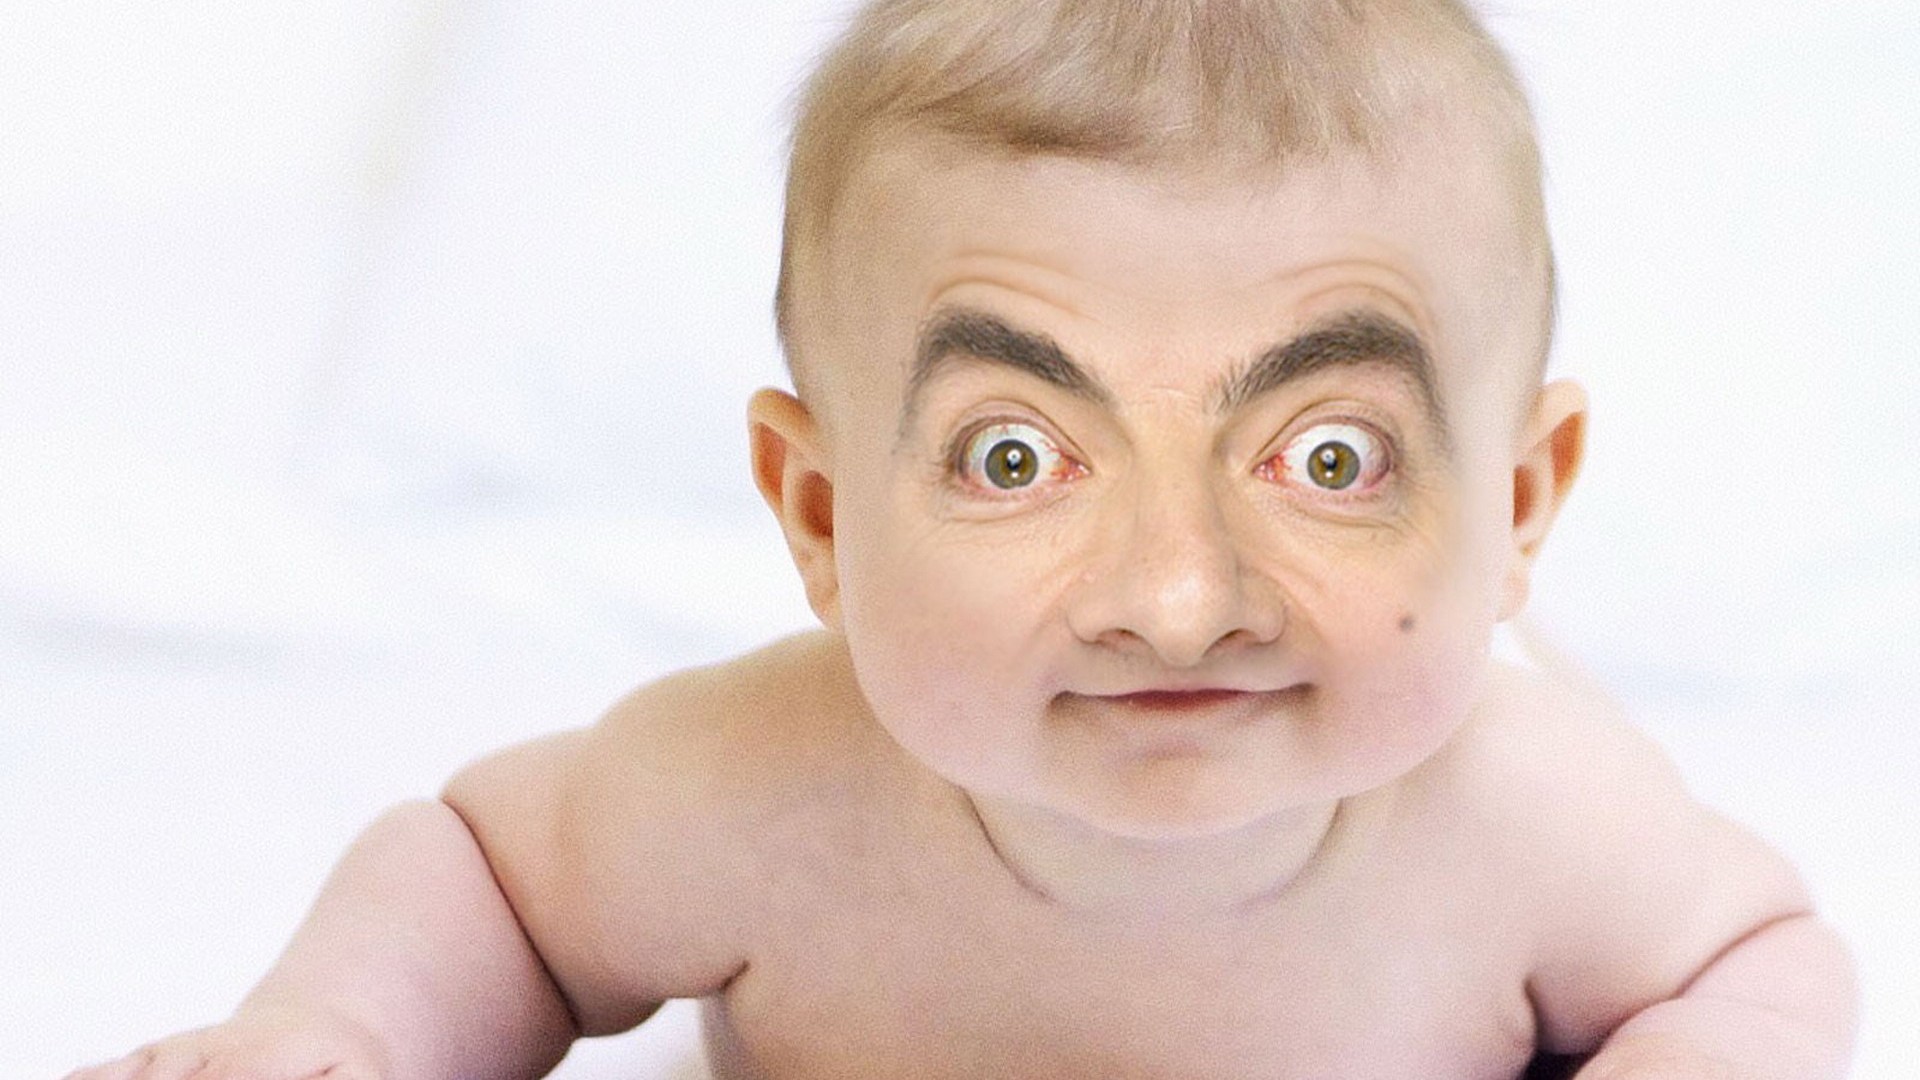 Mr Bean Funny Baby Image Amp Pictures Becuo